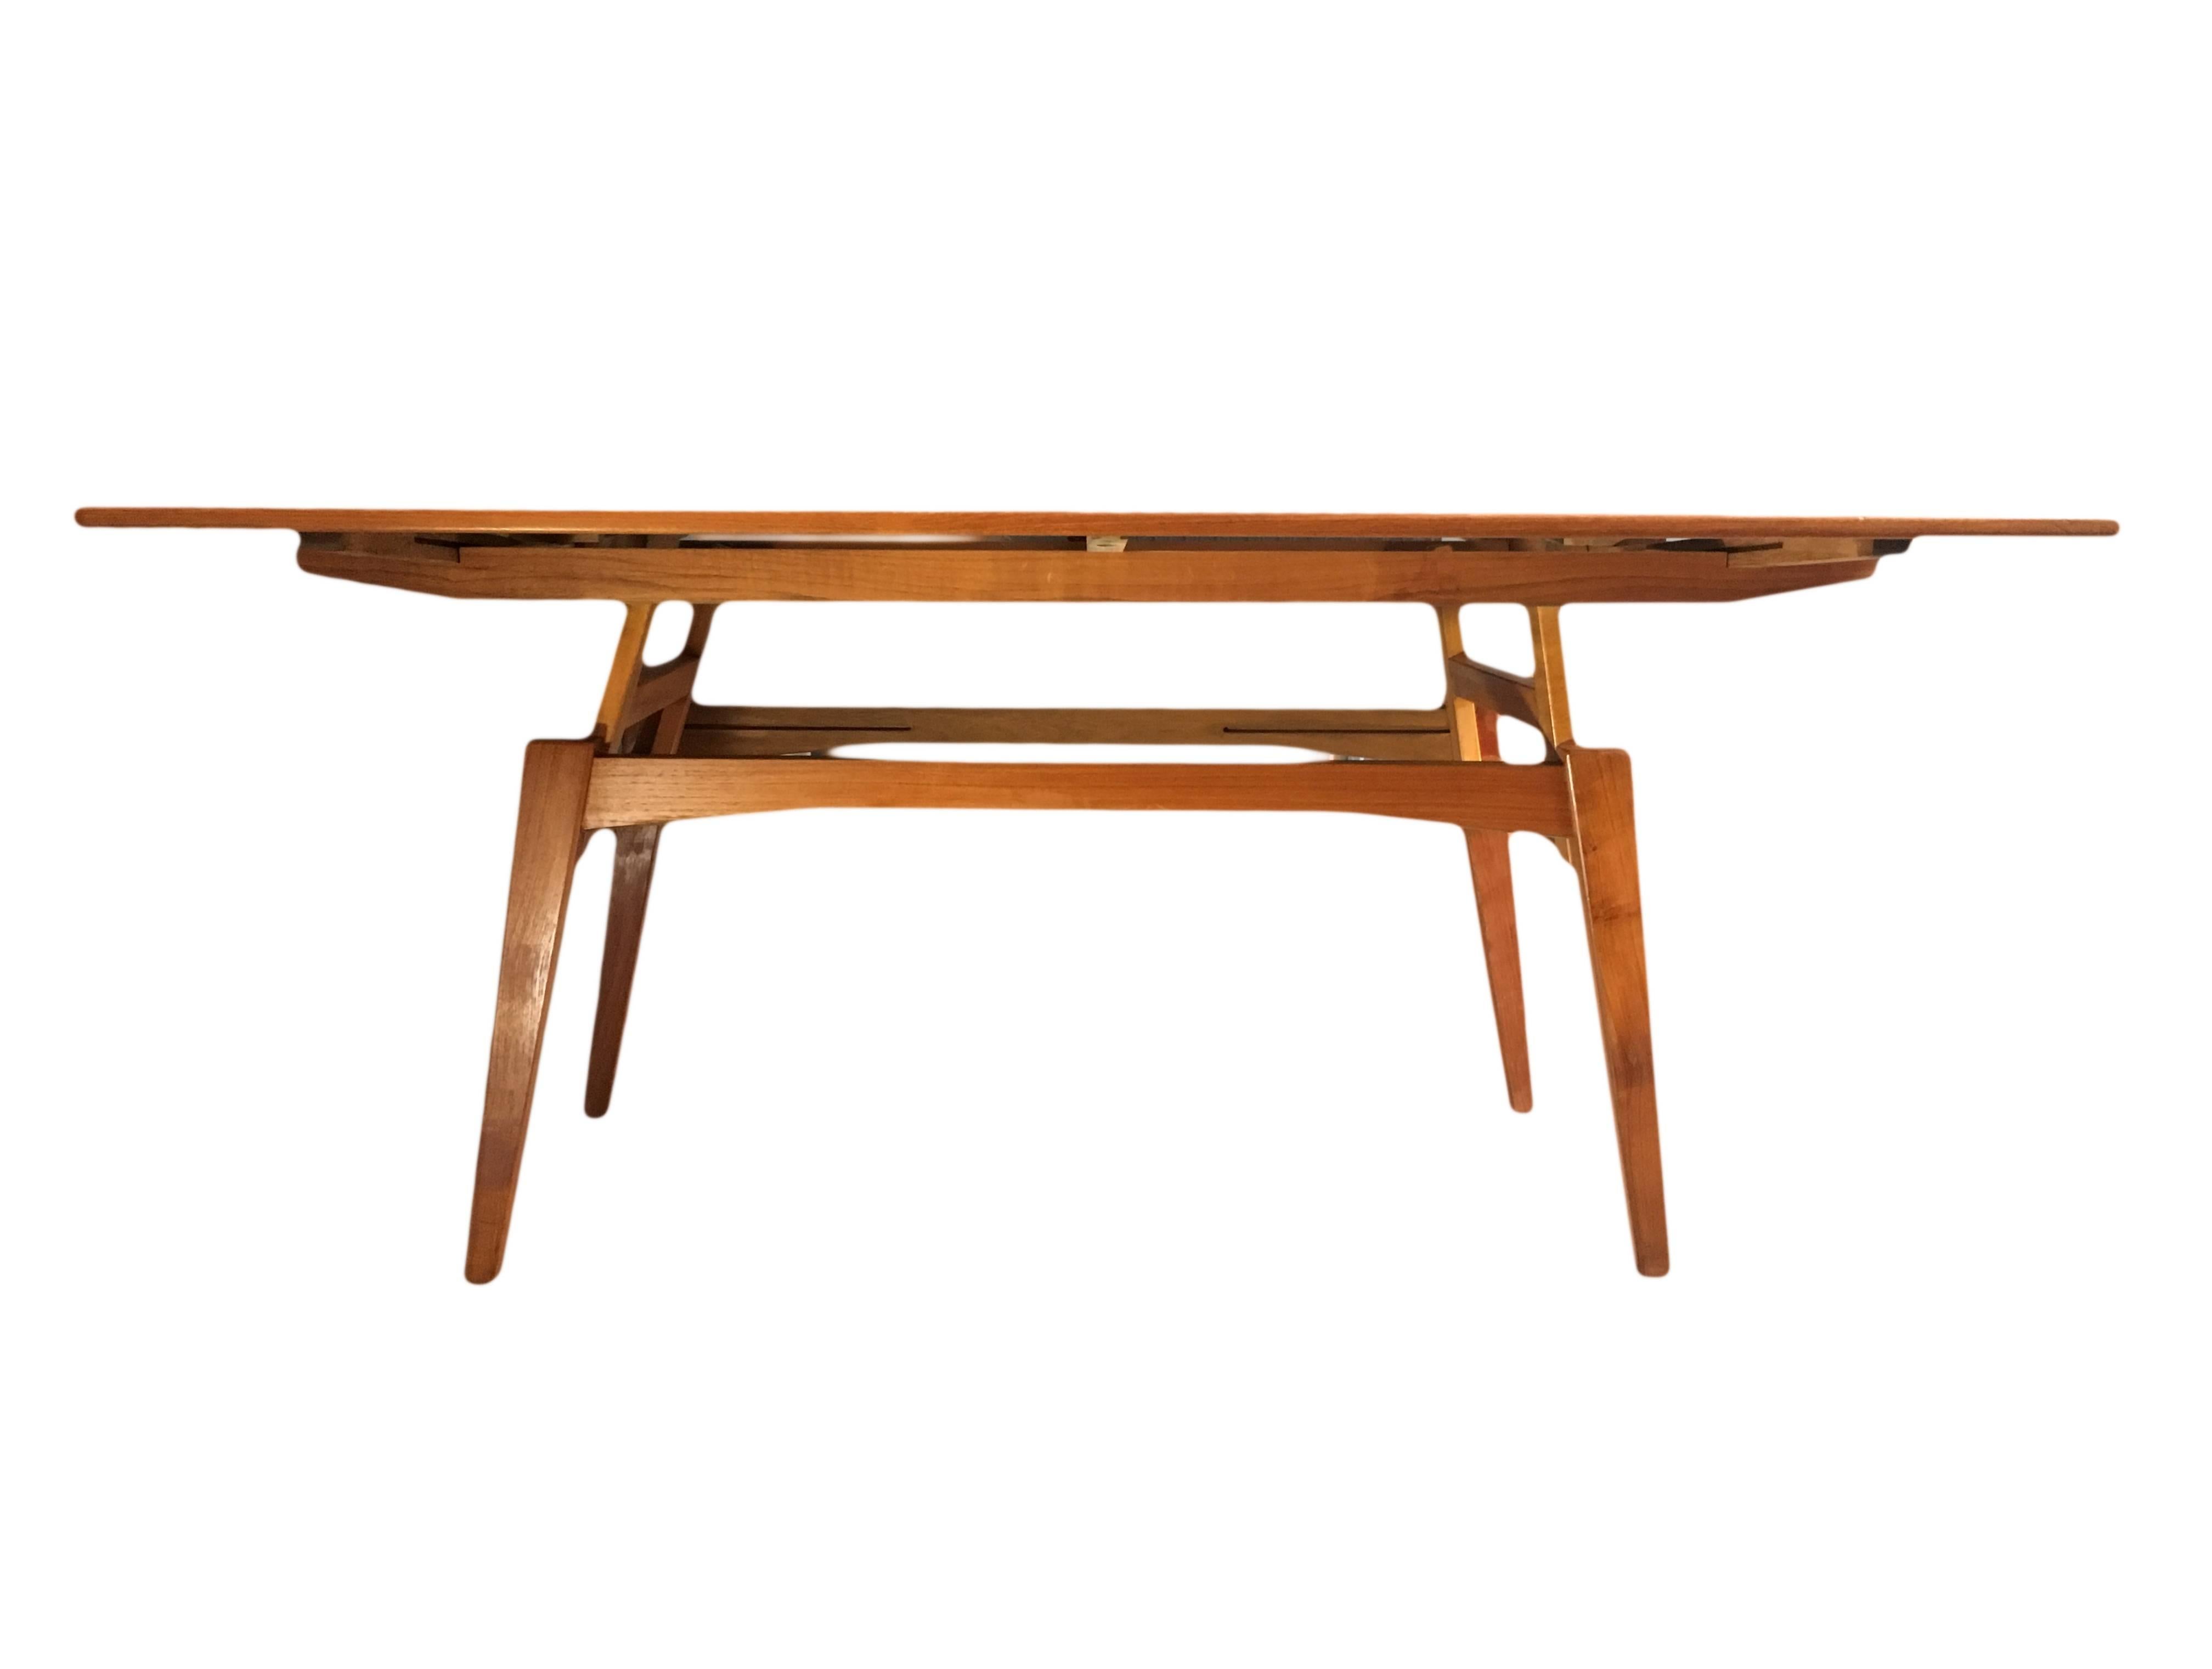 Innovative metamorphic table design by Kai Kristiansen for Trioh, circa 1960. Teak. Great condition. Two available.
Coffee table to dining table in a few easy moves.
U.S shipping available.